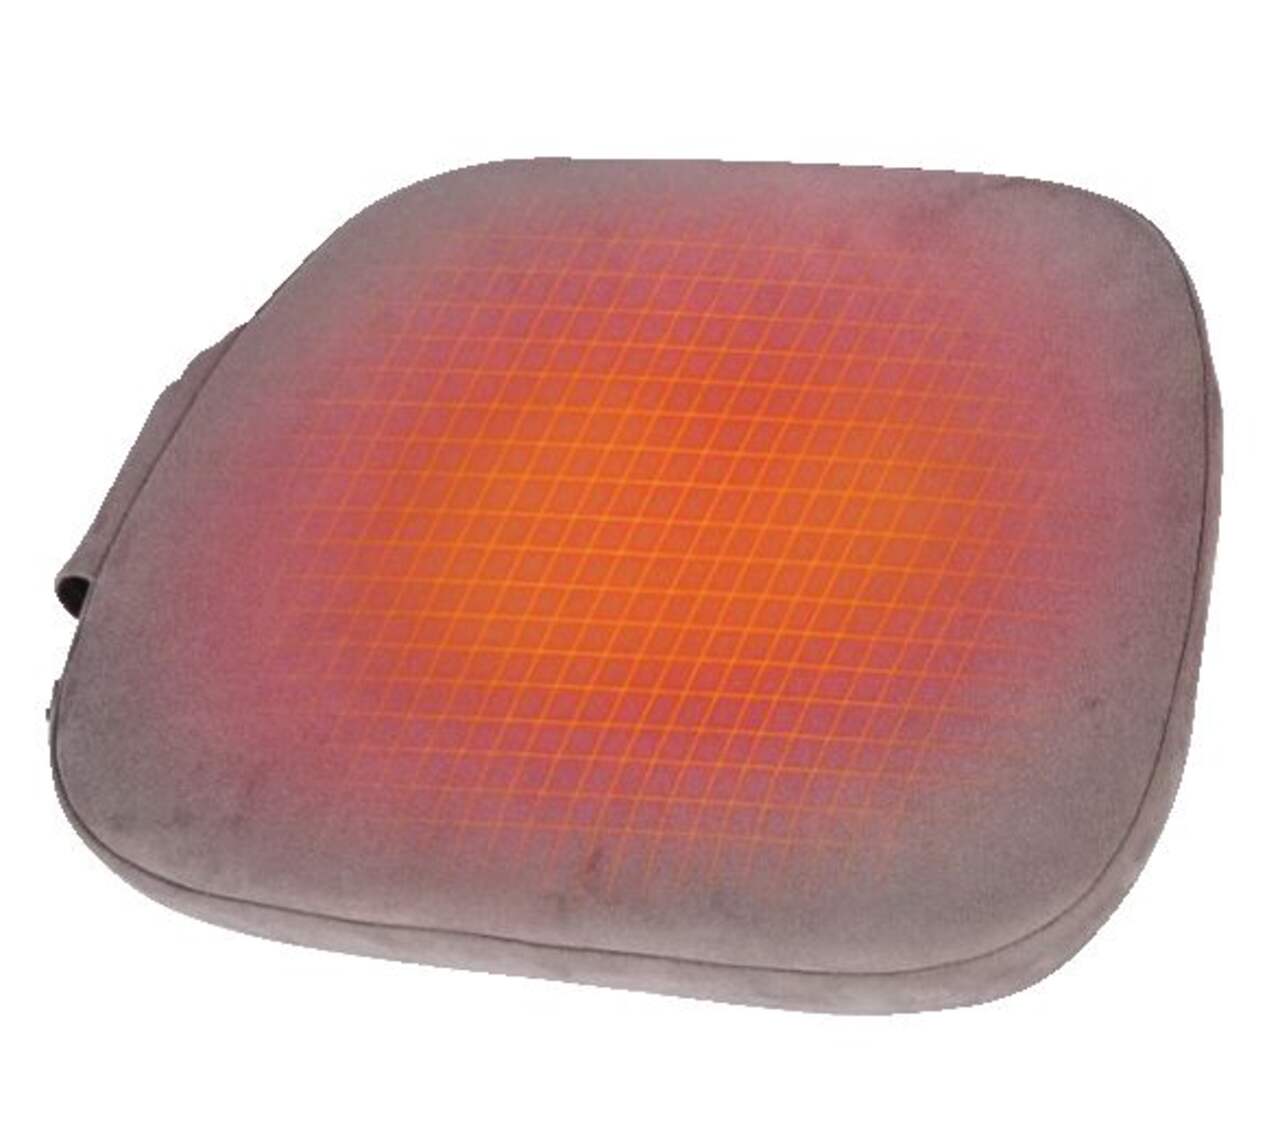 https://media-www.canadiantire.ca/product/automotive/car-care-accessories/auto-comfort/0326782/velour-heated-memory-foam-seat-cushion-08092818-31f2-404d-bc3c-74c133e9c5ab-jpgrendition.jpg?imdensity=1&imwidth=640&impolicy=mZoom